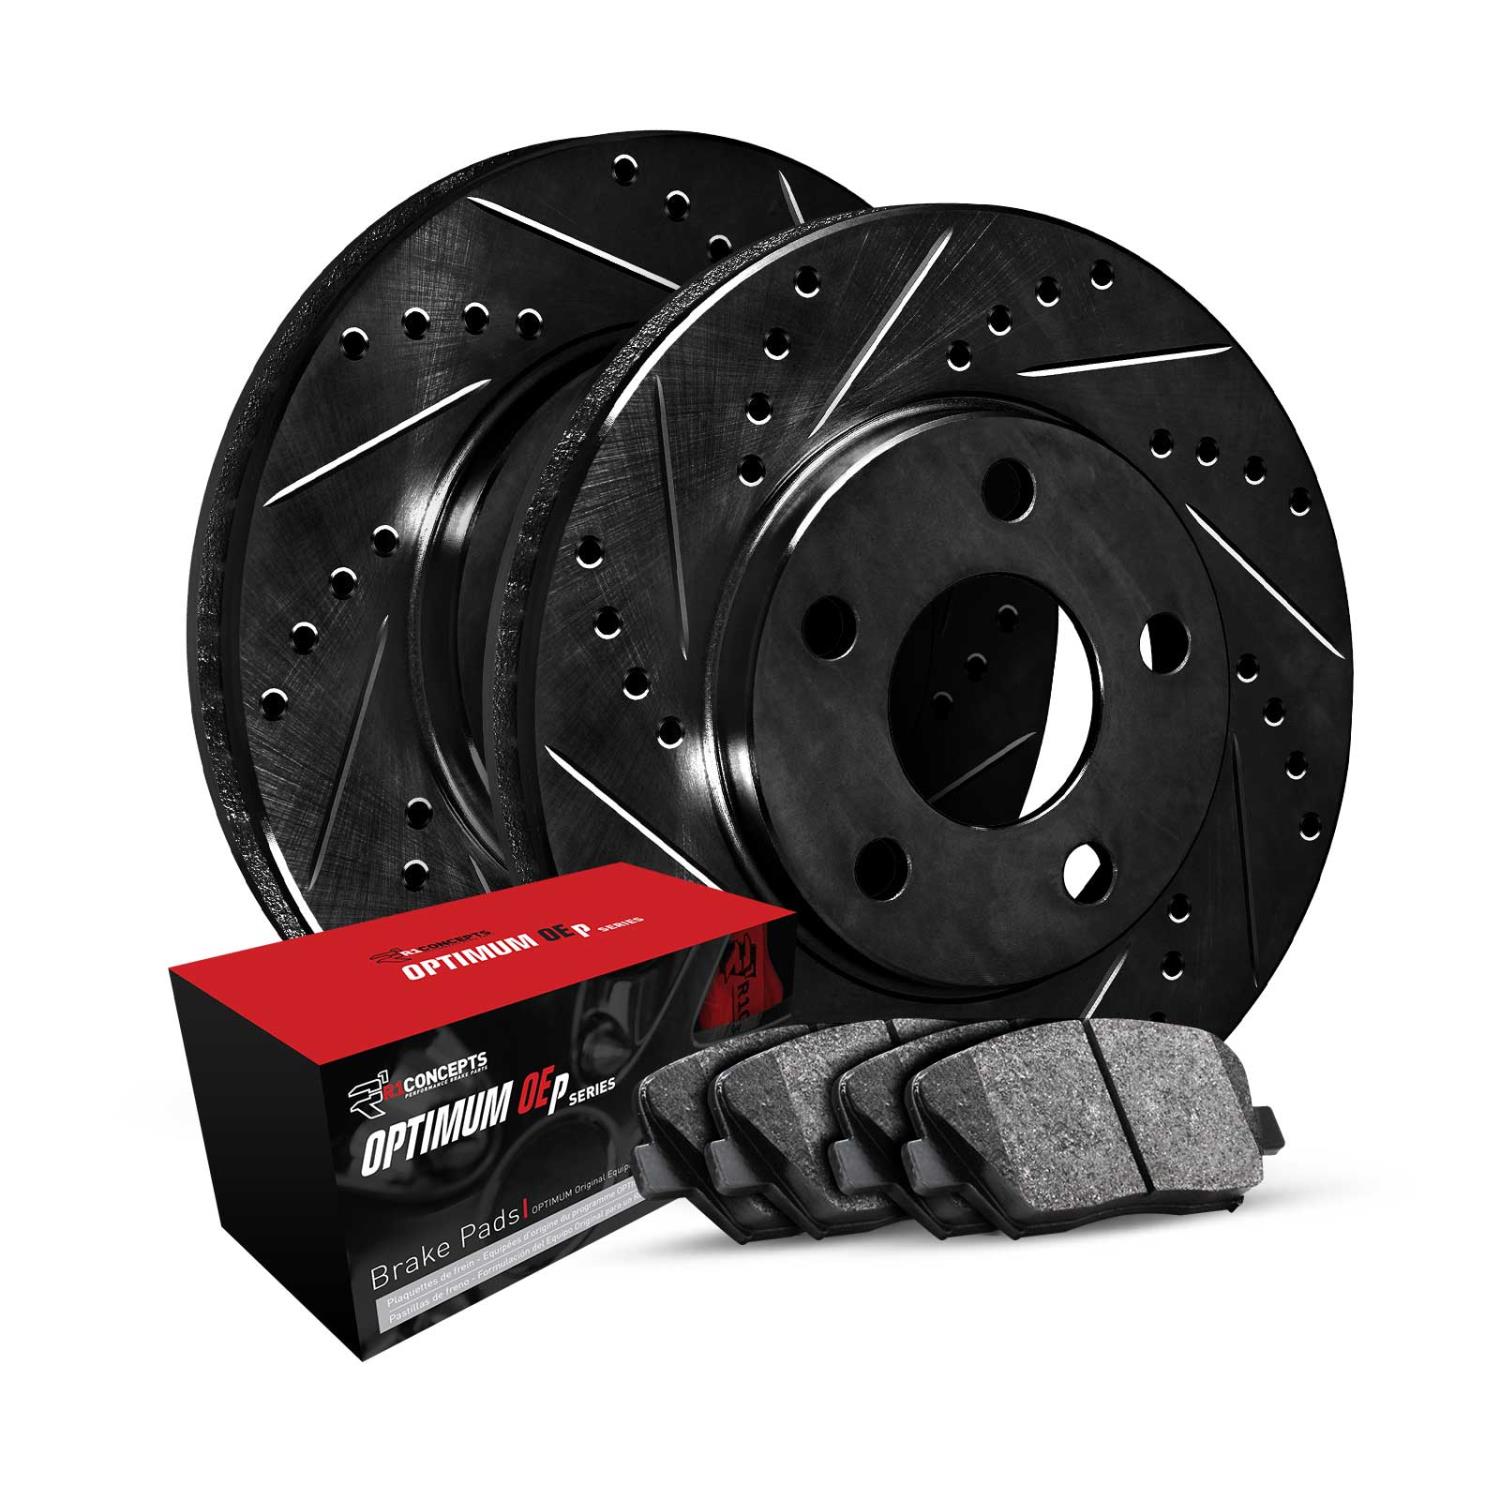 E-Line Drilled & Slotted Black Brake Rotor Set w/Optimum OE Pads, Fits Select Fits Multiple Makes/Models, Position: Rear